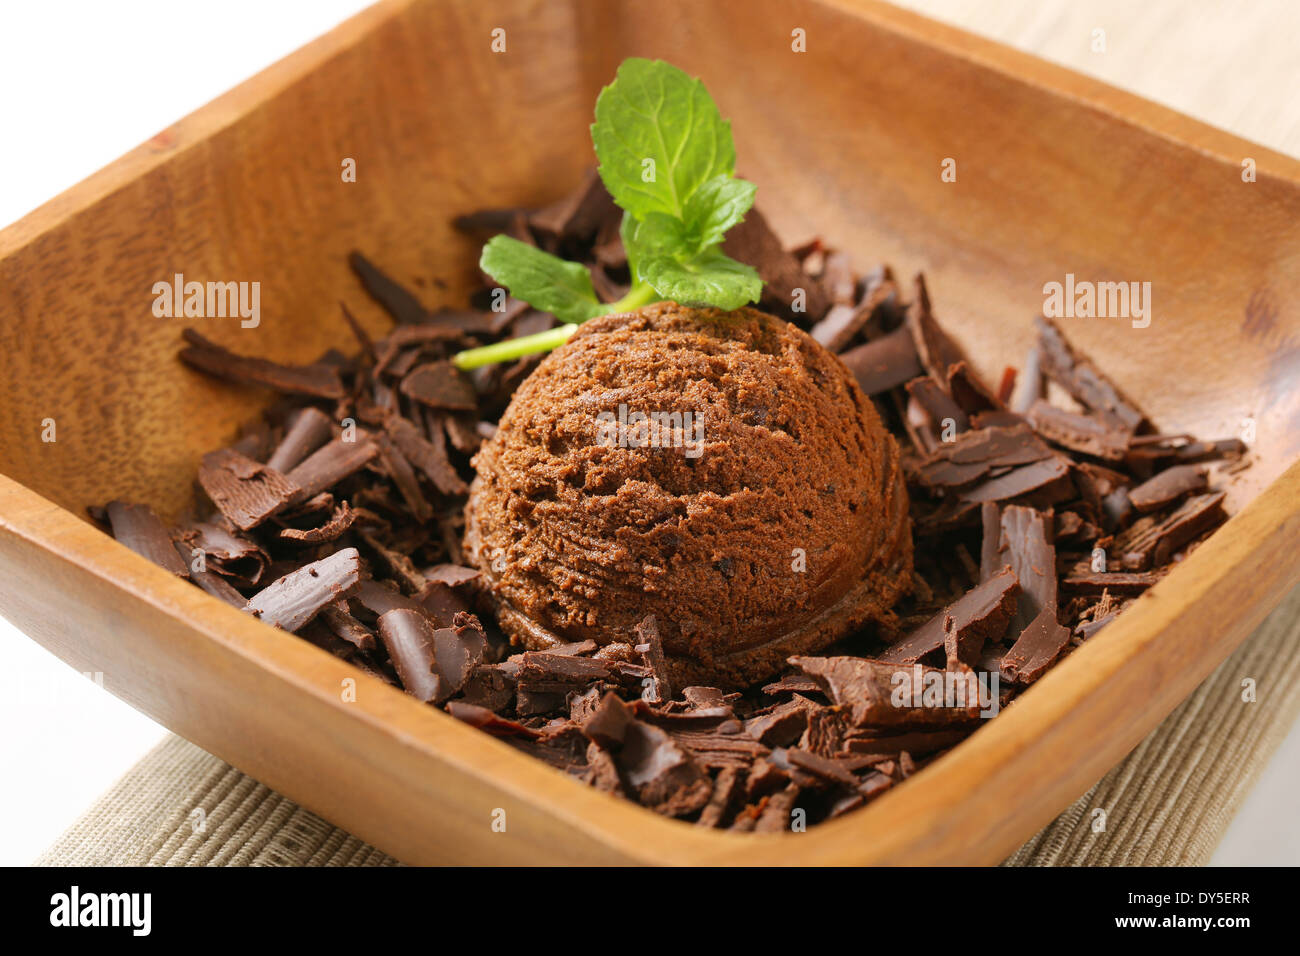 Scoop of ice cream and chocolate shavings in wooden bowl Stock Photo